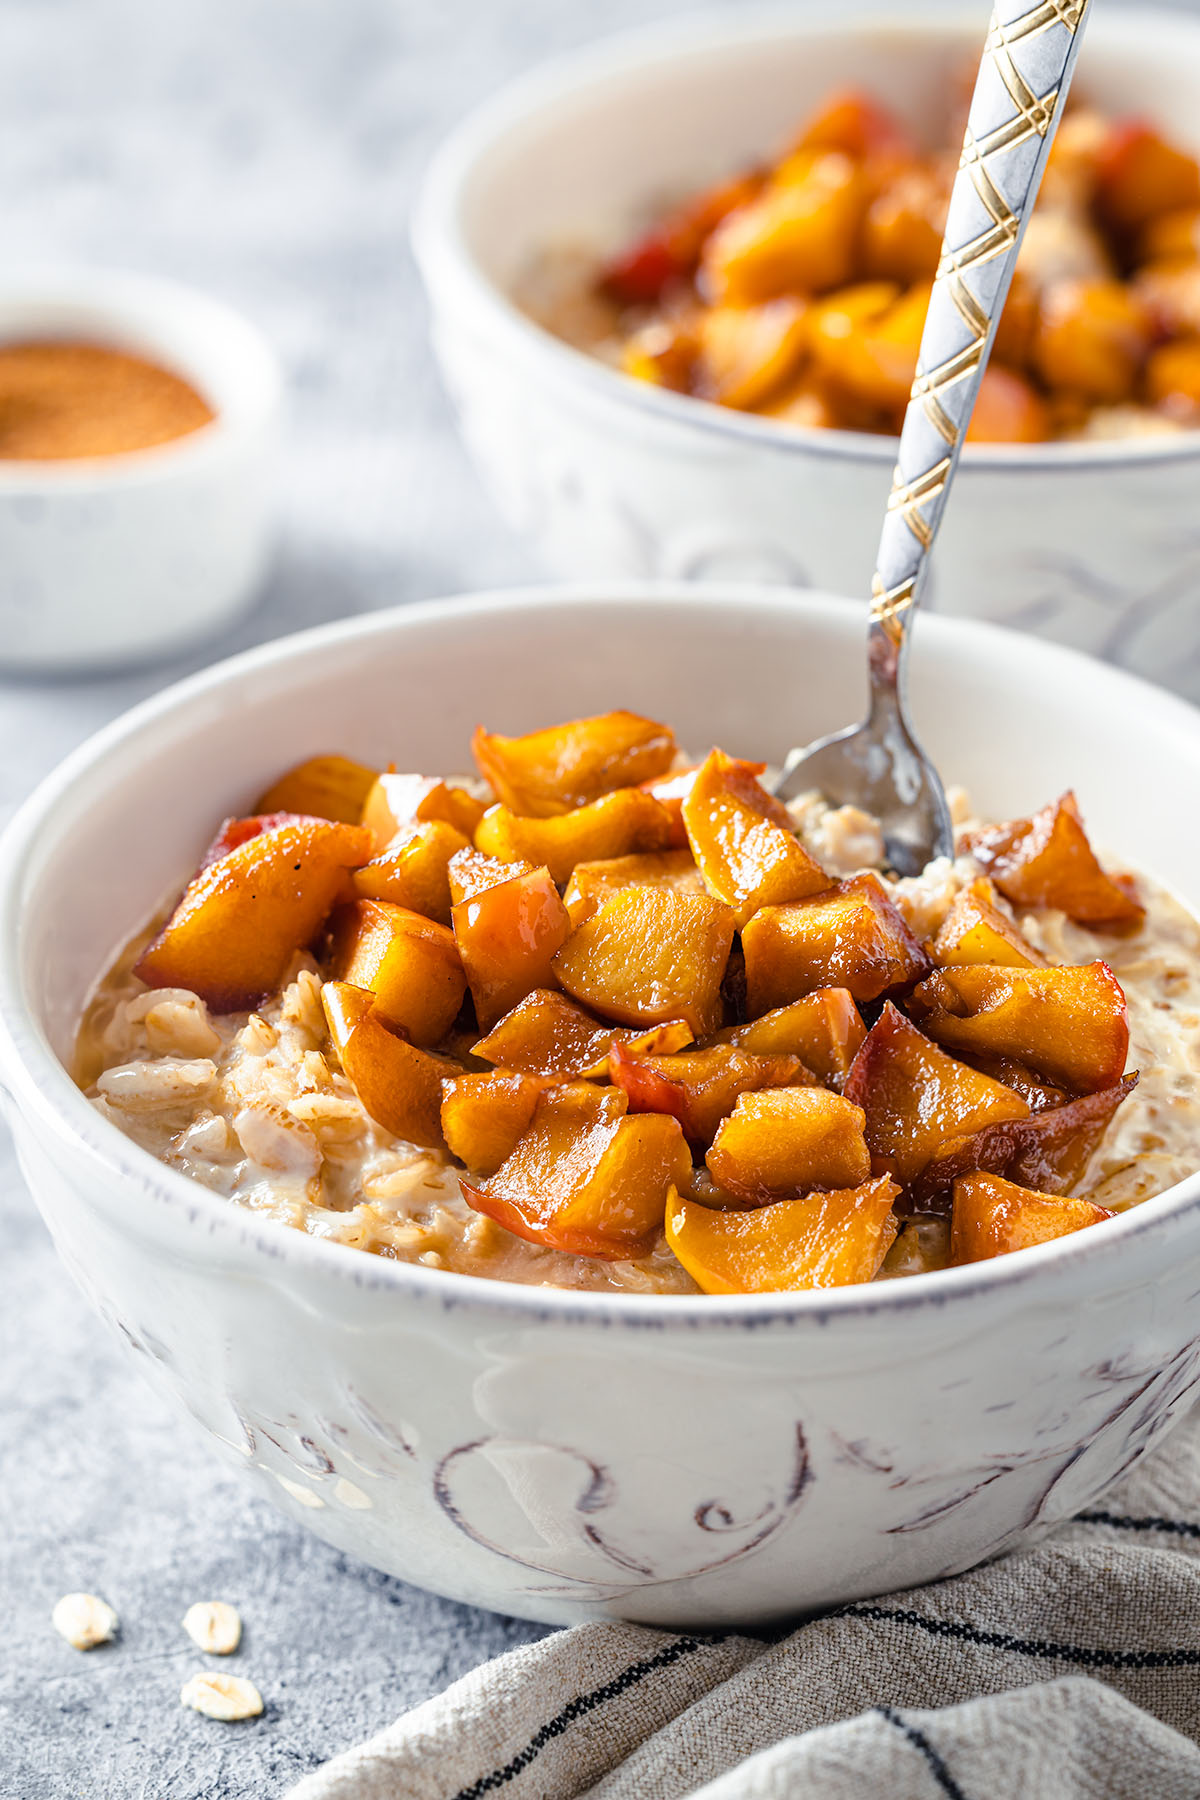 creamy oatmeal served with caramelized apples